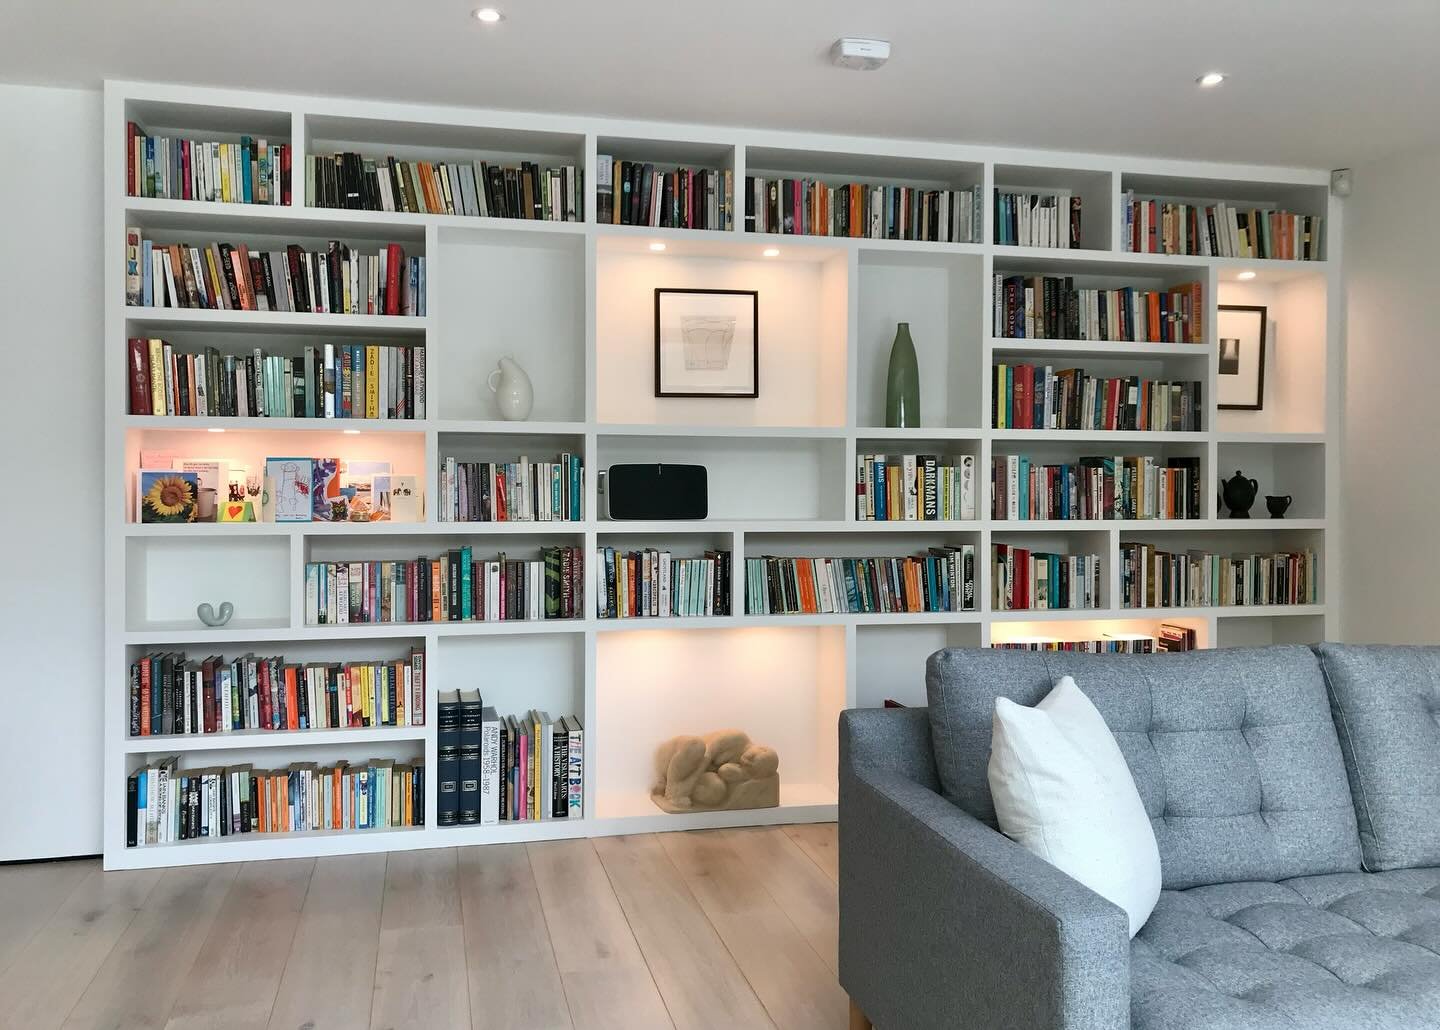 This client required storage and display space in their living area. This bespoke cabinetry provided the perfect solution. It includes various sized display shelves and LED lighting. 📚👌🏽